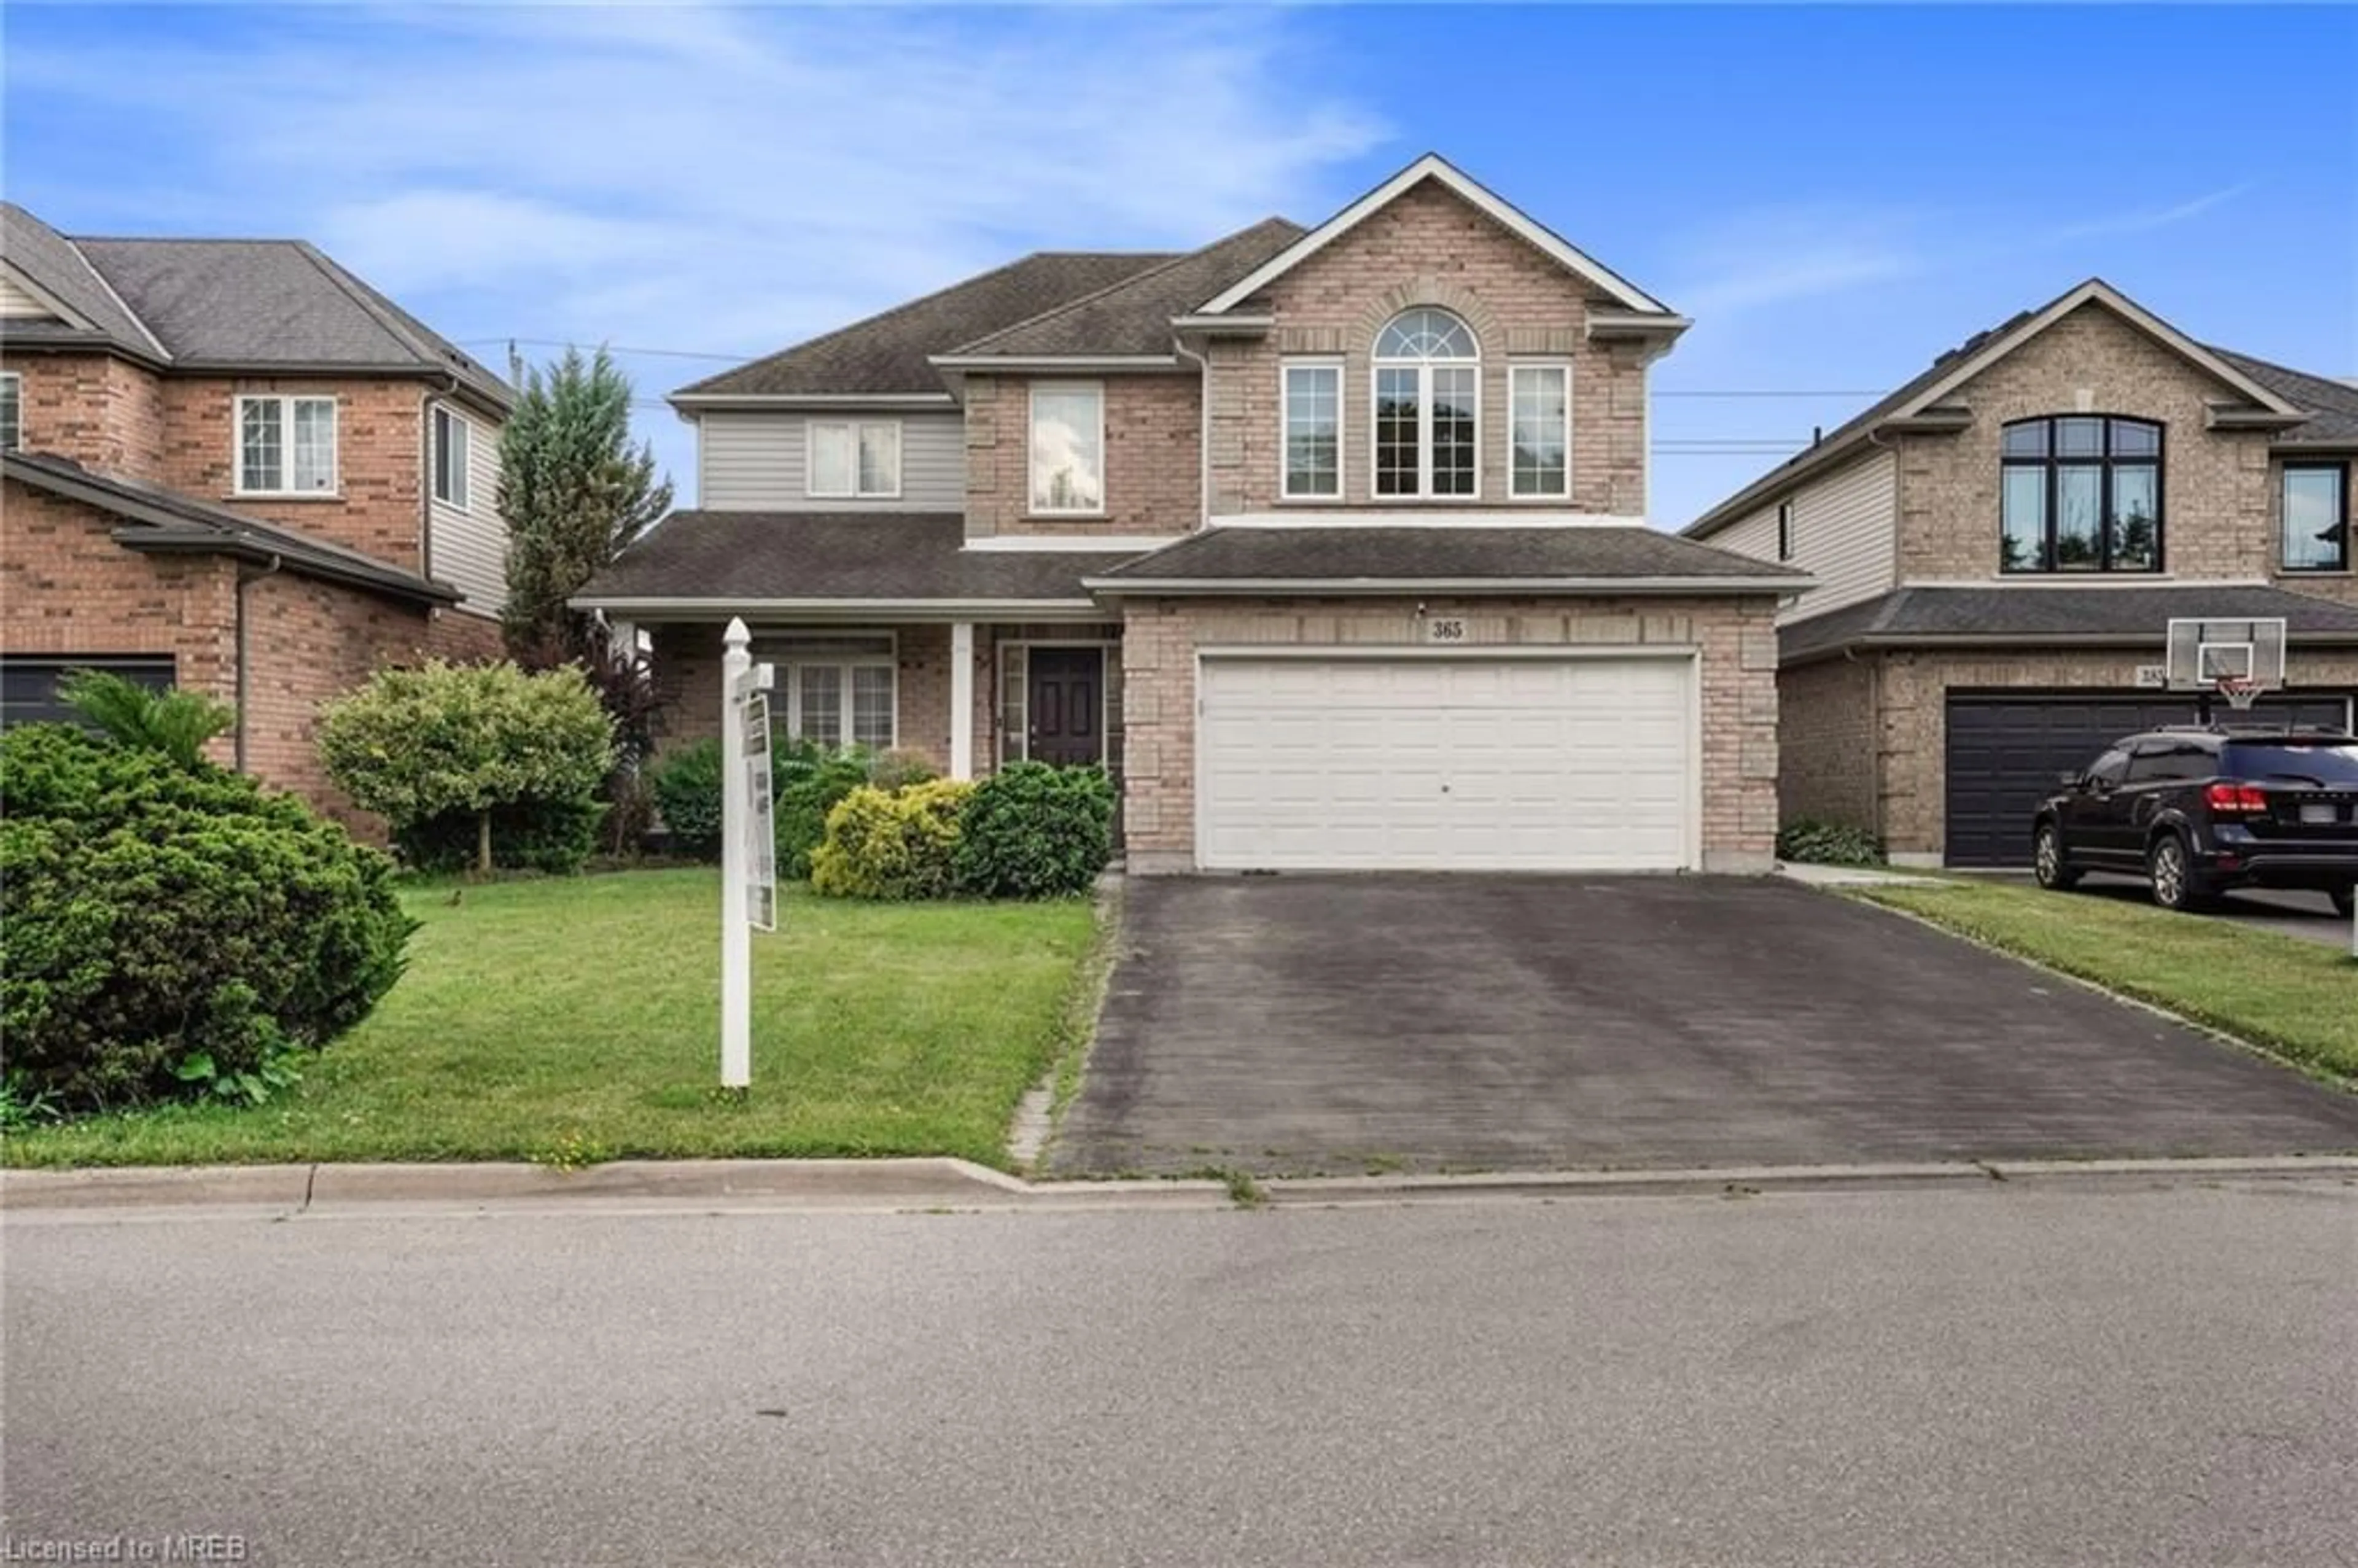 Frontside or backside of a home for 365 Hillsdale Rd, Welland Ontario L3C 7M2